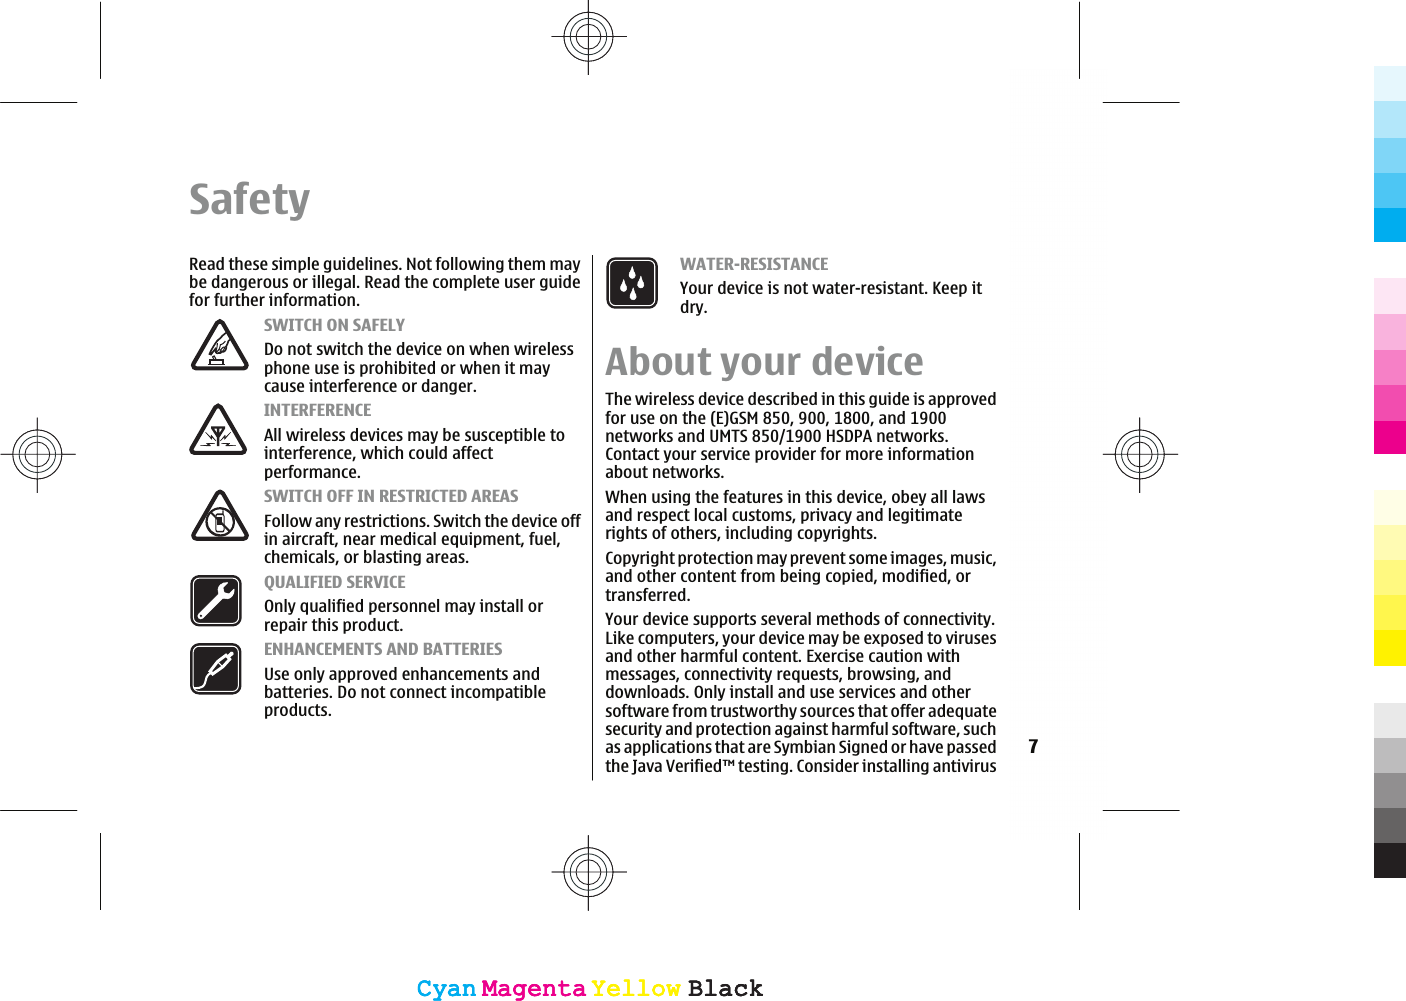 SafetyRead these simple guidelines. Not following them maybe dangerous or illegal. Read the complete user guidefor further information.SWITCH ON SAFELYDo not switch the device on when wirelessphone use is prohibited or when it maycause interference or danger.INTERFERENCEAll wireless devices may be susceptible tointerference, which could affectperformance.SWITCH OFF IN RESTRICTED AREASFollow any restrictions. Switch the device offin aircraft, near medical equipment, fuel,chemicals, or blasting areas.QUALIFIED SERVICEOnly qualified personnel may install orrepair this product.ENHANCEMENTS AND BATTERIESUse only approved enhancements andbatteries. Do not connect incompatibleproducts.WATER-RESISTANCEYour device is not water-resistant. Keep itdry.About your deviceThe wireless device described in this guide is approvedfor use on the (E)GSM 850, 900, 1800, and 1900networks and UMTS 850/1900 HSDPA networks.Contact your service provider for more informationabout networks.When using the features in this device, obey all lawsand respect local customs, privacy and legitimaterights of others, including copyrights.Copyright protection may prevent some images, music,and other content from being copied, modified, ortransferred.Your device supports several methods of connectivity.Like computers, your device may be exposed to virusesand other harmful content. Exercise caution withmessages, connectivity requests, browsing, anddownloads. Only install and use services and othersoftware from trustworthy sources that offer adequatesecurity and protection against harmful software, suchas applications that are Symbian Signed or have passedthe Java Verified™ testing. Consider installing antivirus7CyanCyanMagentaMagentaYellowYellowBlackBlackCyanCyanMagentaMagentaYellowYellowBlackBlack